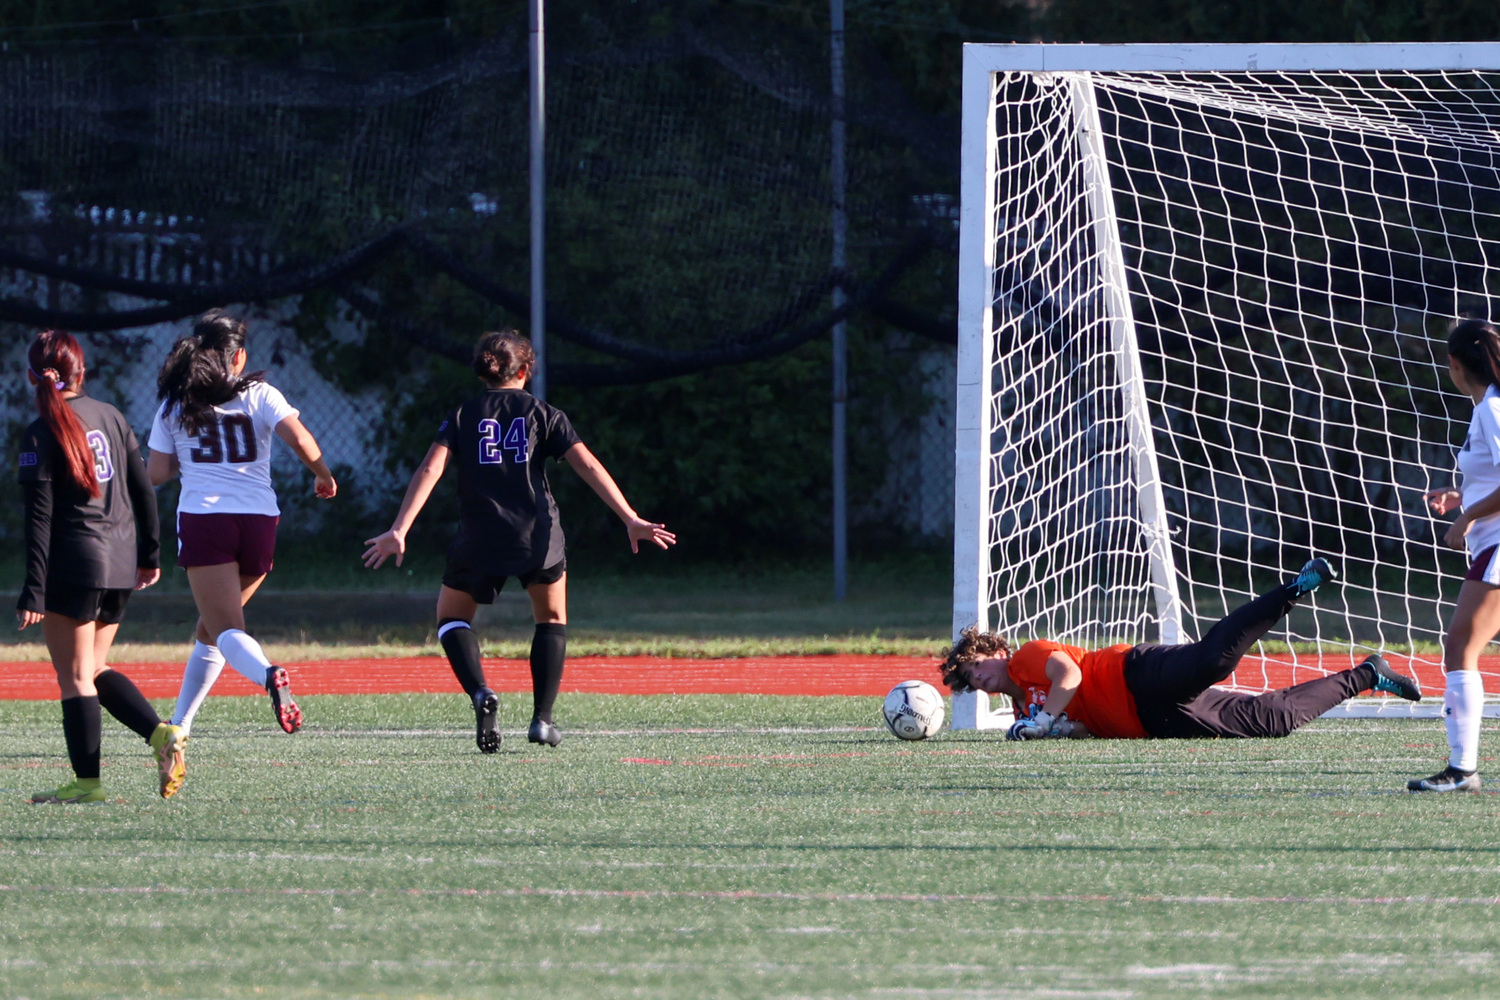 Hampton Bays senior goalie Jordyn Heaney makes an initial stop on a shot but East Hampton senior Rihanna Pinos knocked in the rebound for the first goal of the game.   MICHAEL O'CONNOR